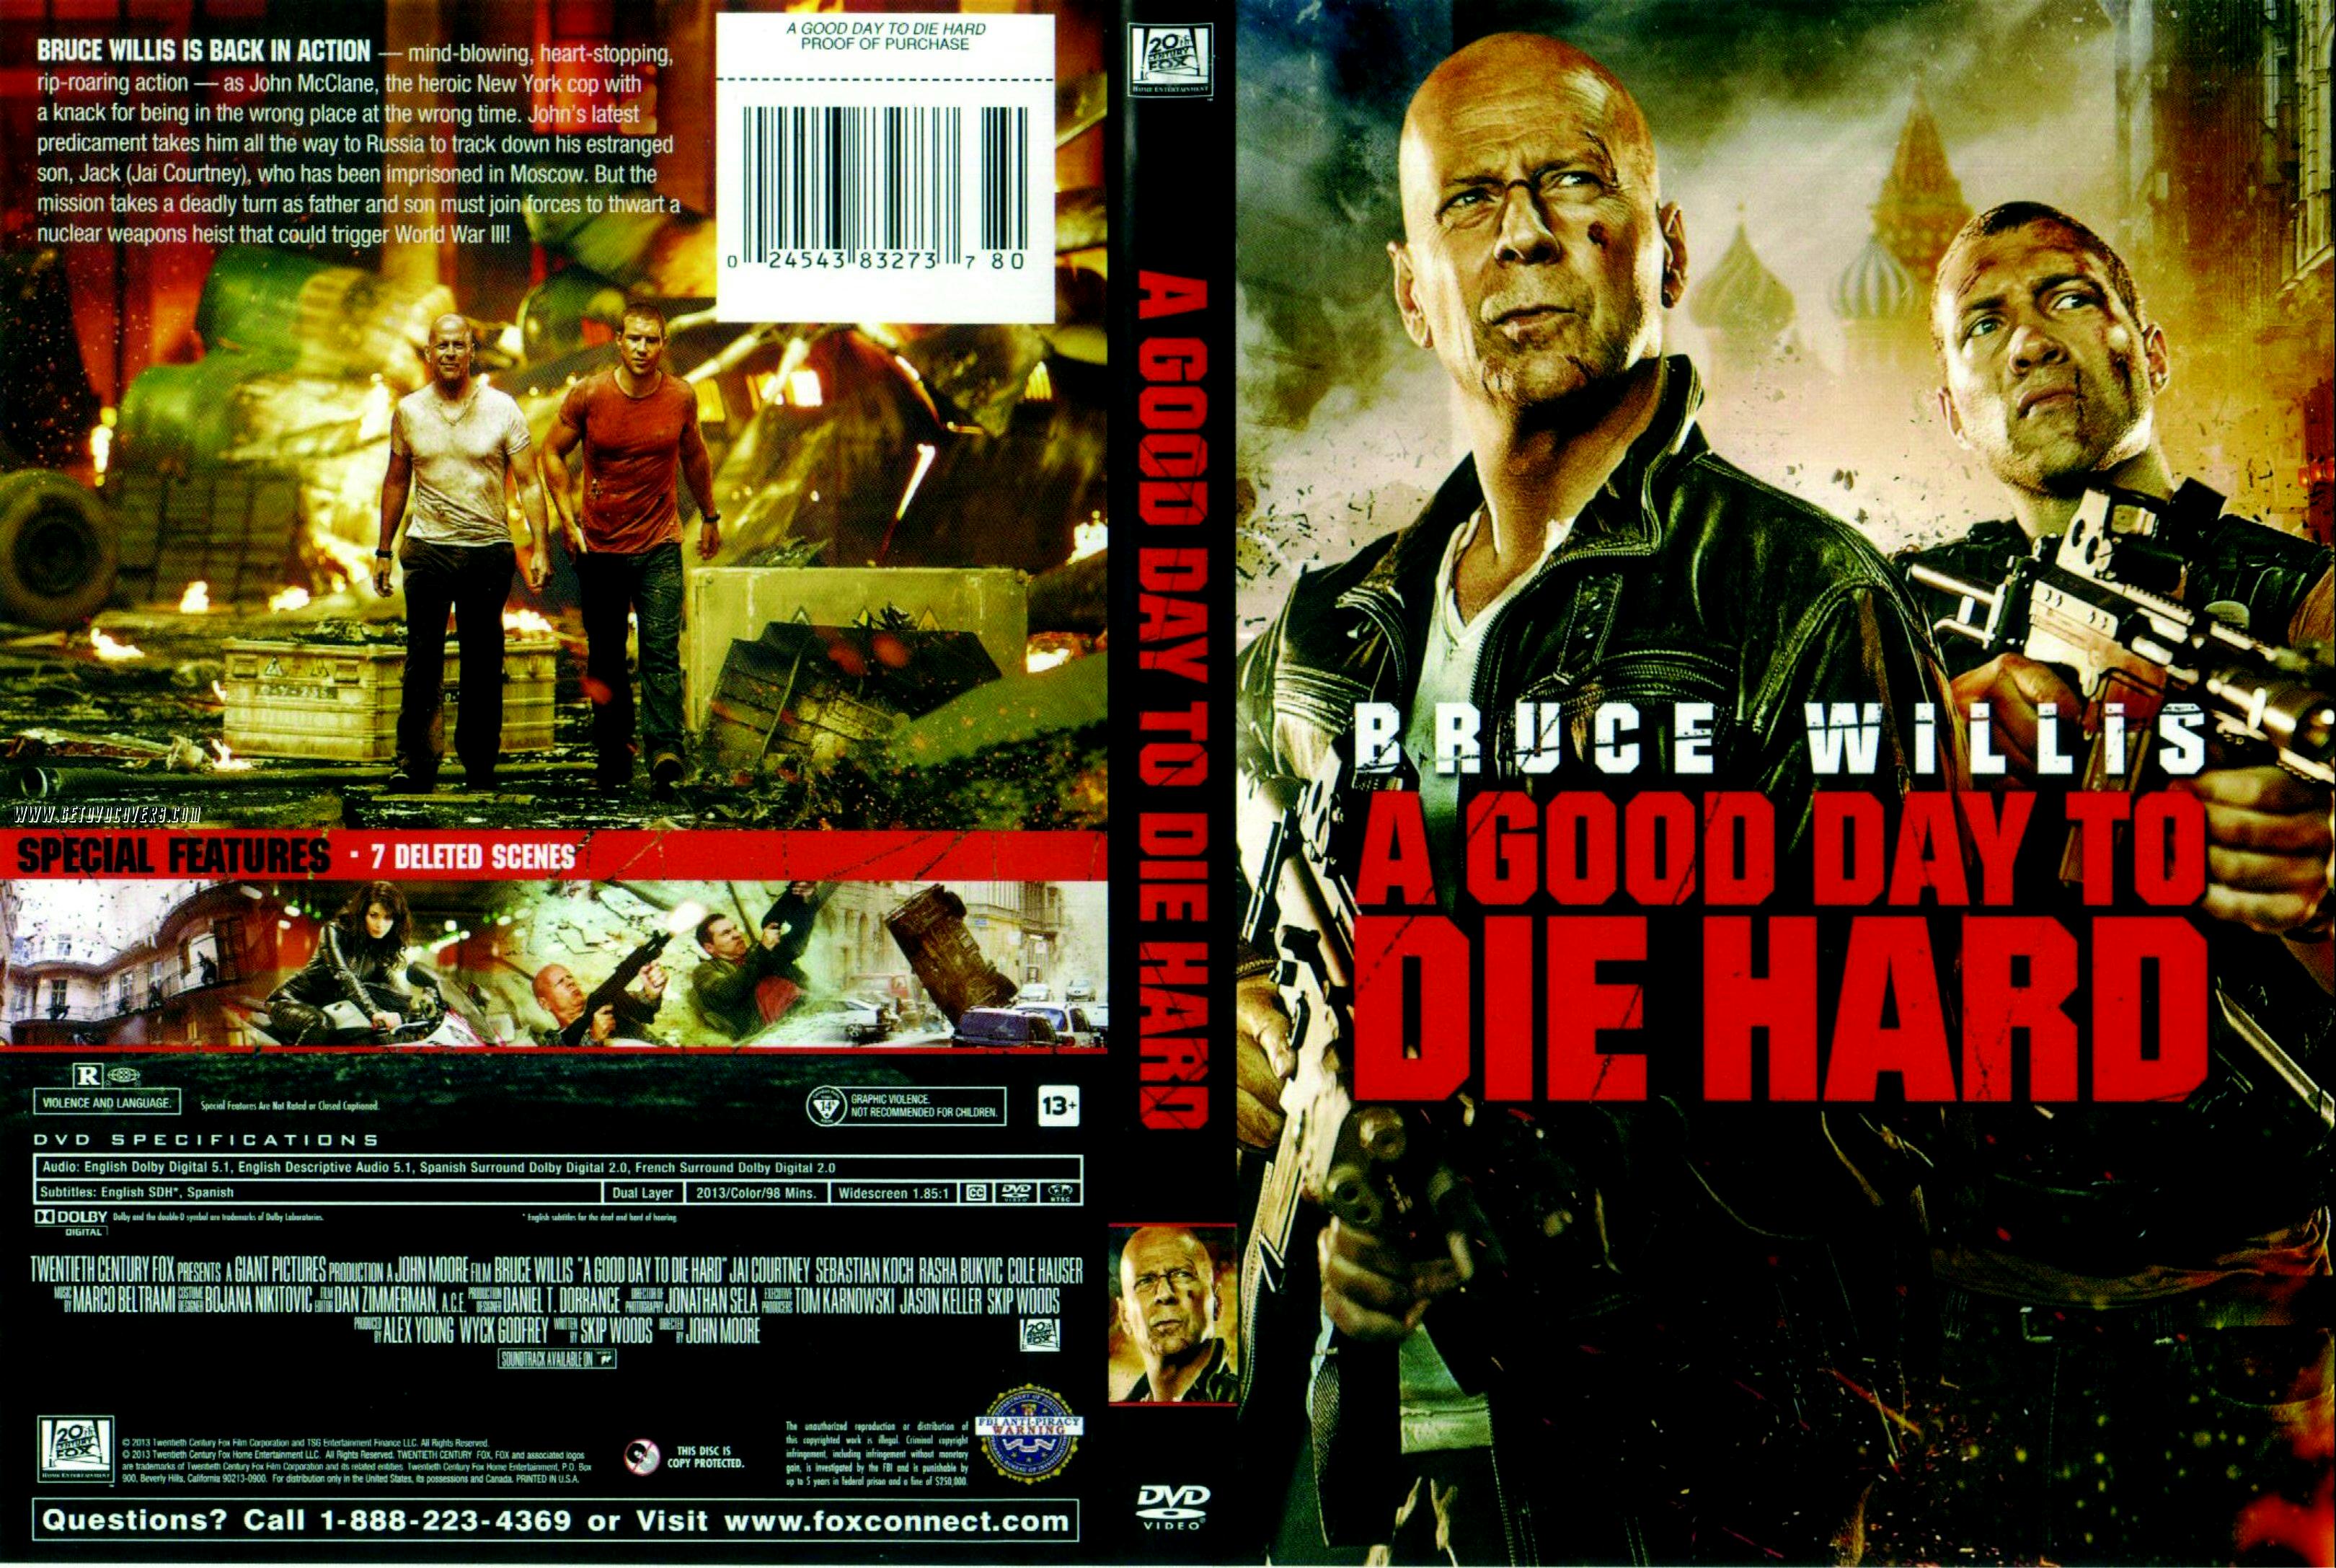 Jaquette DVD A Good Day To Die Hard - Die Hard Belle journe pour mourir Zone 1